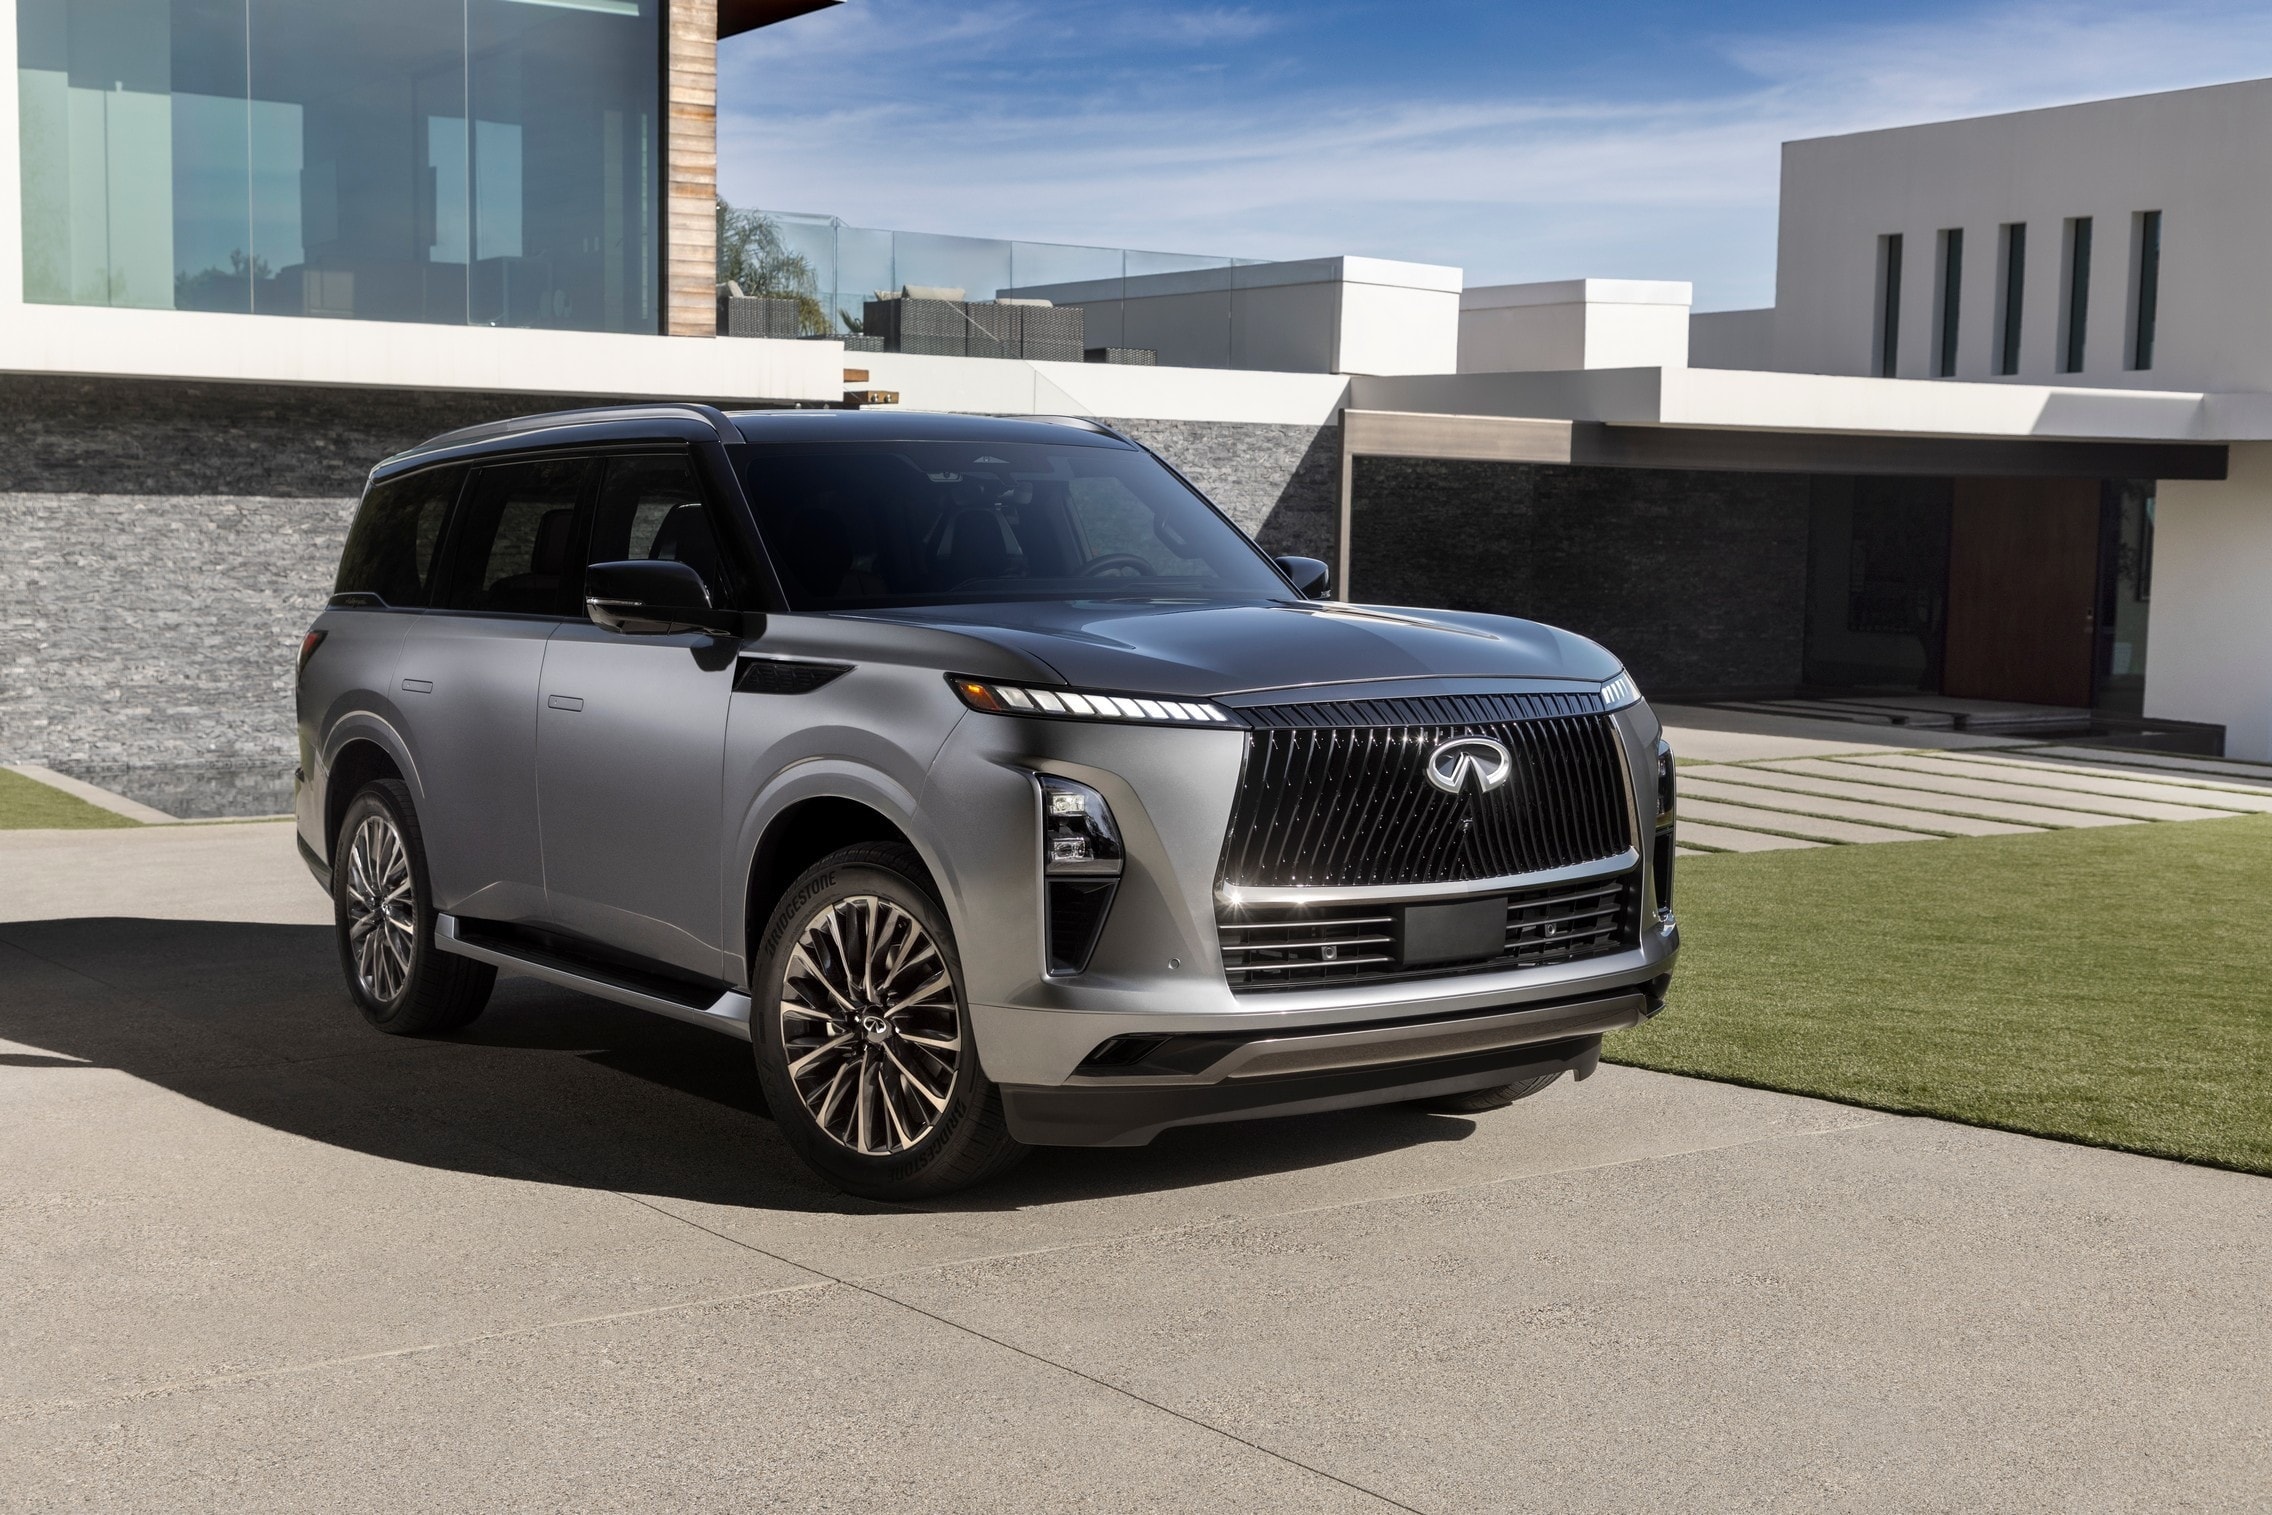 2025 Infiniti QX80 Redefining Luxury SUVs with Refreshed Design and Power